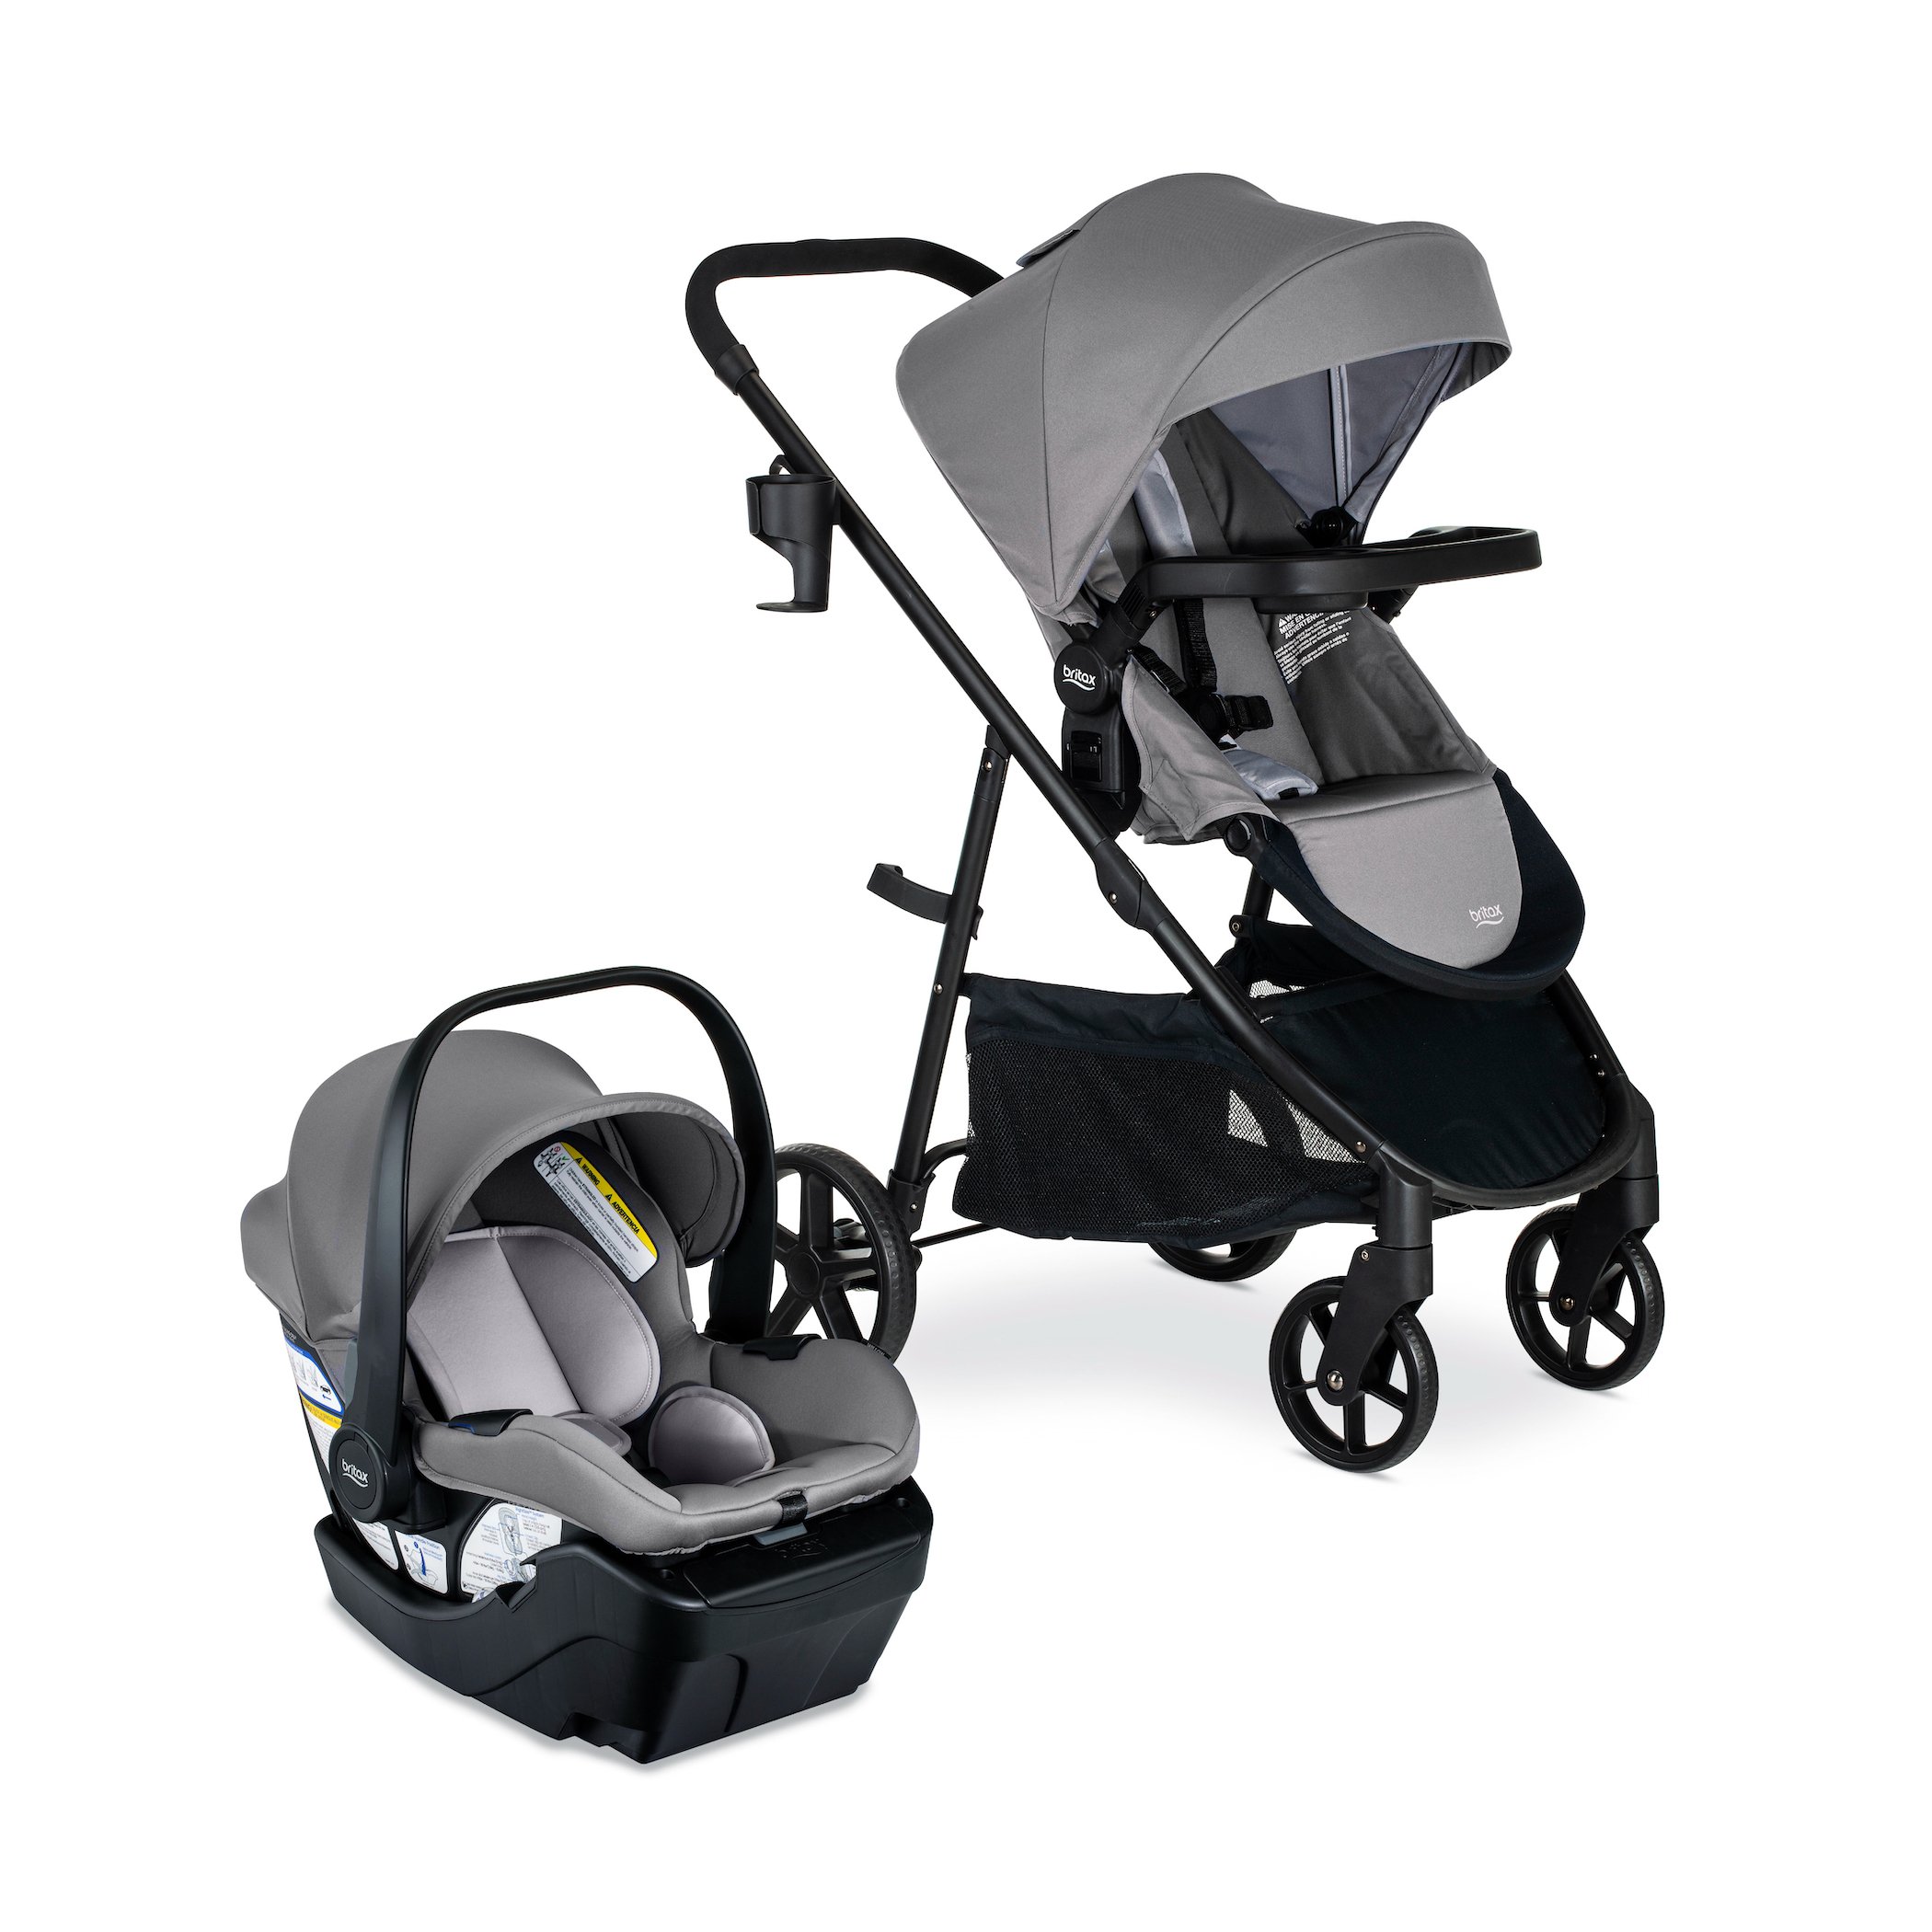 Graphite Glacier Left Facing Willow Car Seat next to Brook Stroller